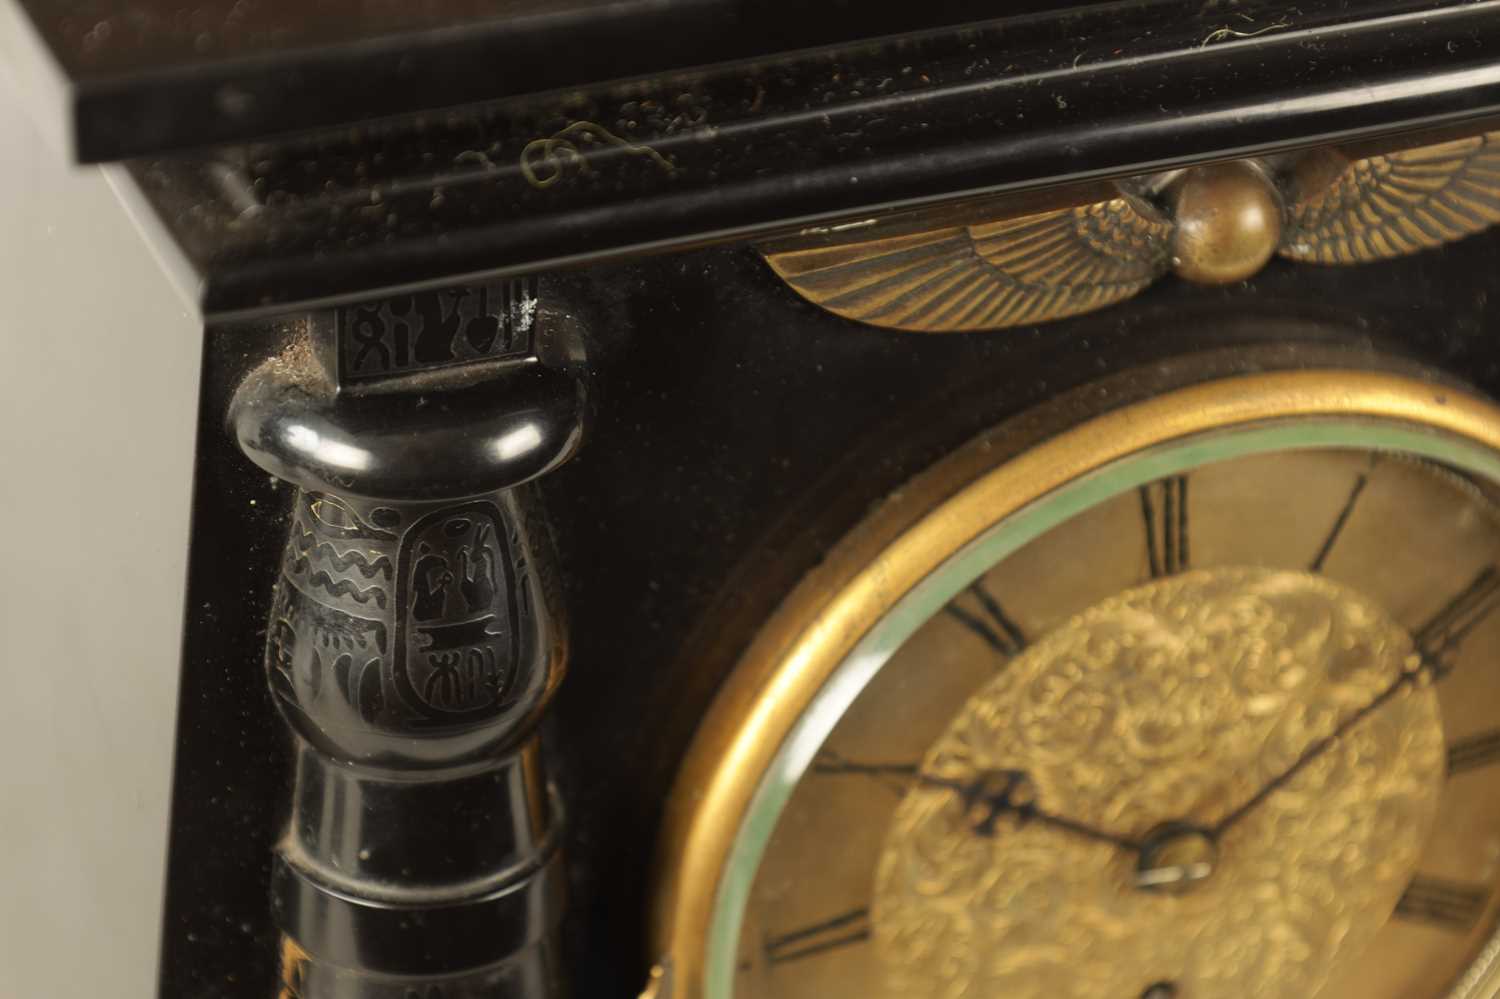 AN ENGLISH REGENCY EGYPTIAN REVIVAL FUSEE MANTEL CLOCK - Image 6 of 12